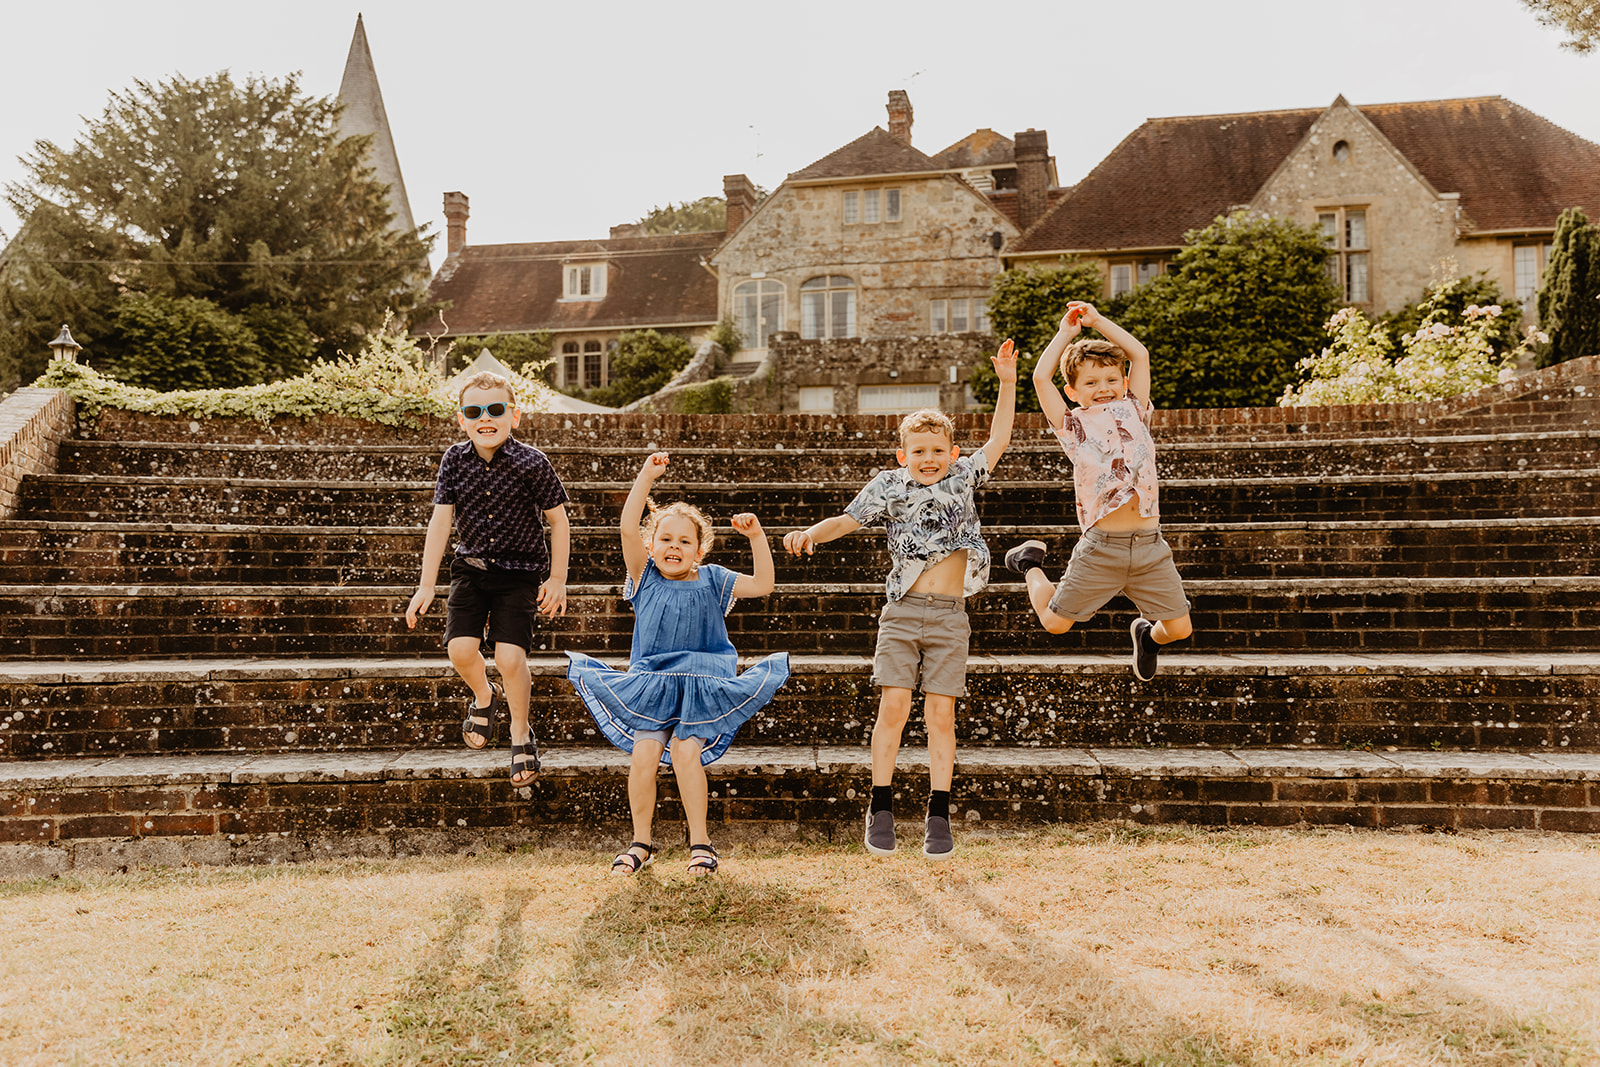 Kids jumping off steps at a Bury Manor Barn Wedding in Sussex. Photographer OliveJoy Photography.